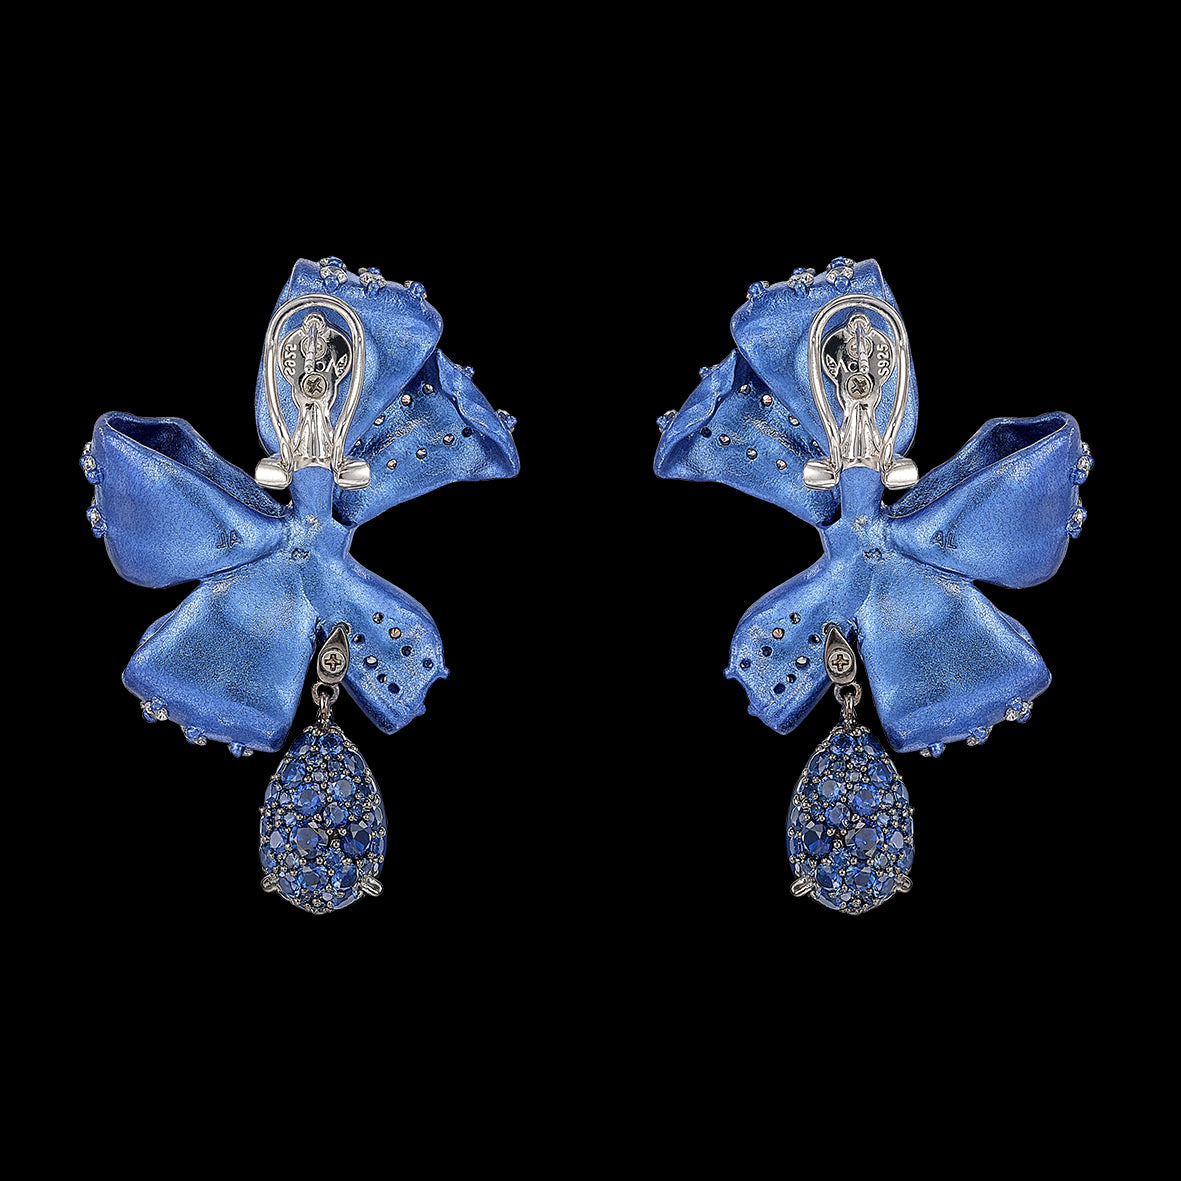 Midi Sapphire Gingham Bow Earrings, Earring, Anabela Chan Joaillerie - Fine jewelry with laboratory grown and created gemstones hand-crafted in the United Kingdom. Anabela Chan Joaillerie is the first fine jewellery brand in the world to champion laboratory-grown and created gemstones with high jewellery design, artisanal craftsmanship and a focus on ethical and sustainable innovations.